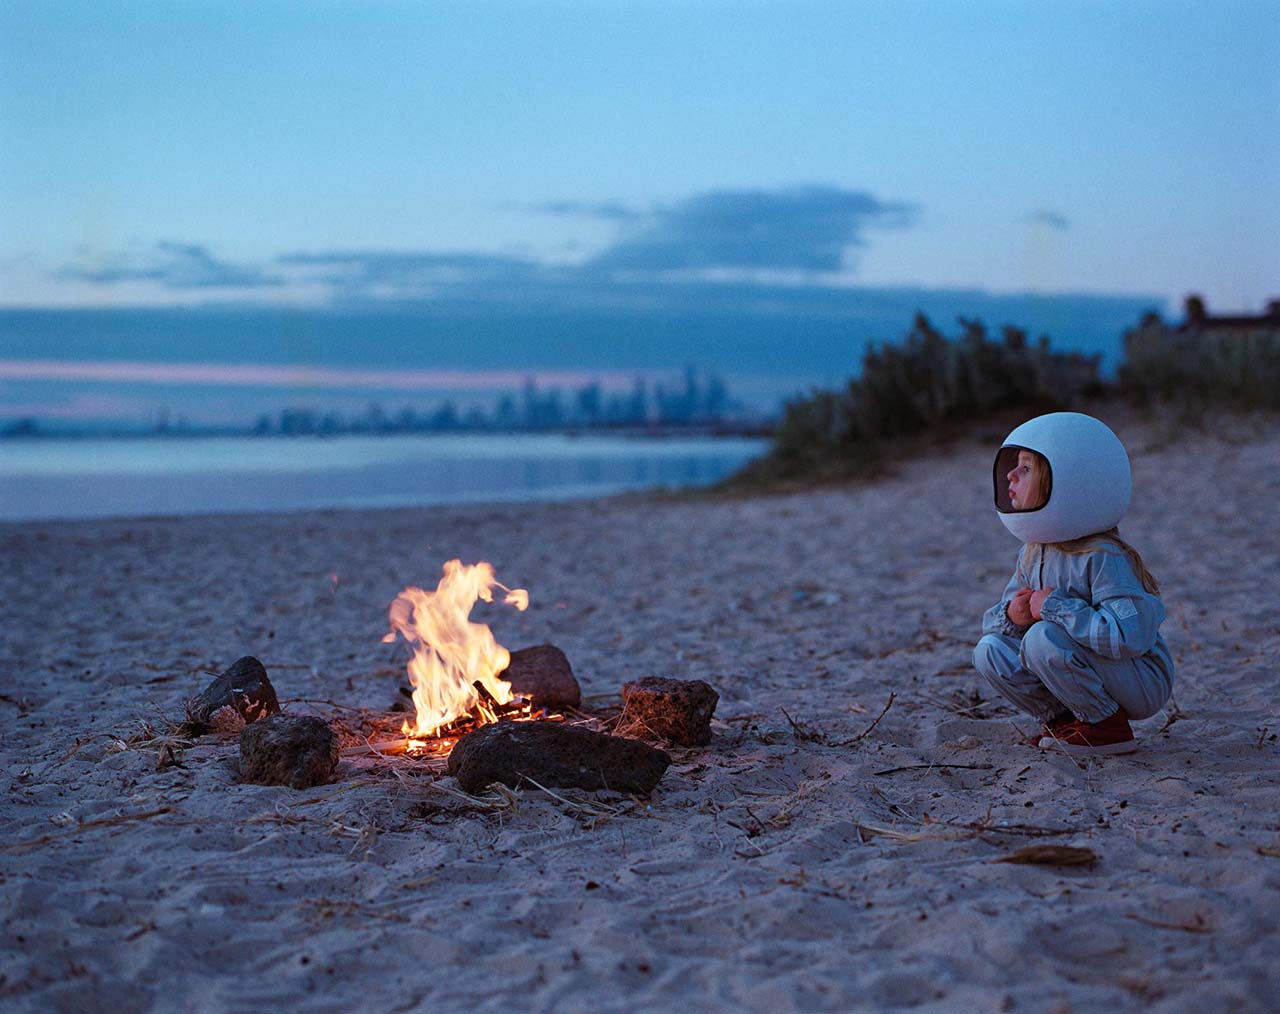 A young girl wearing a spacesuit costume and helmet crouches by a fire on the beach with the city in the background